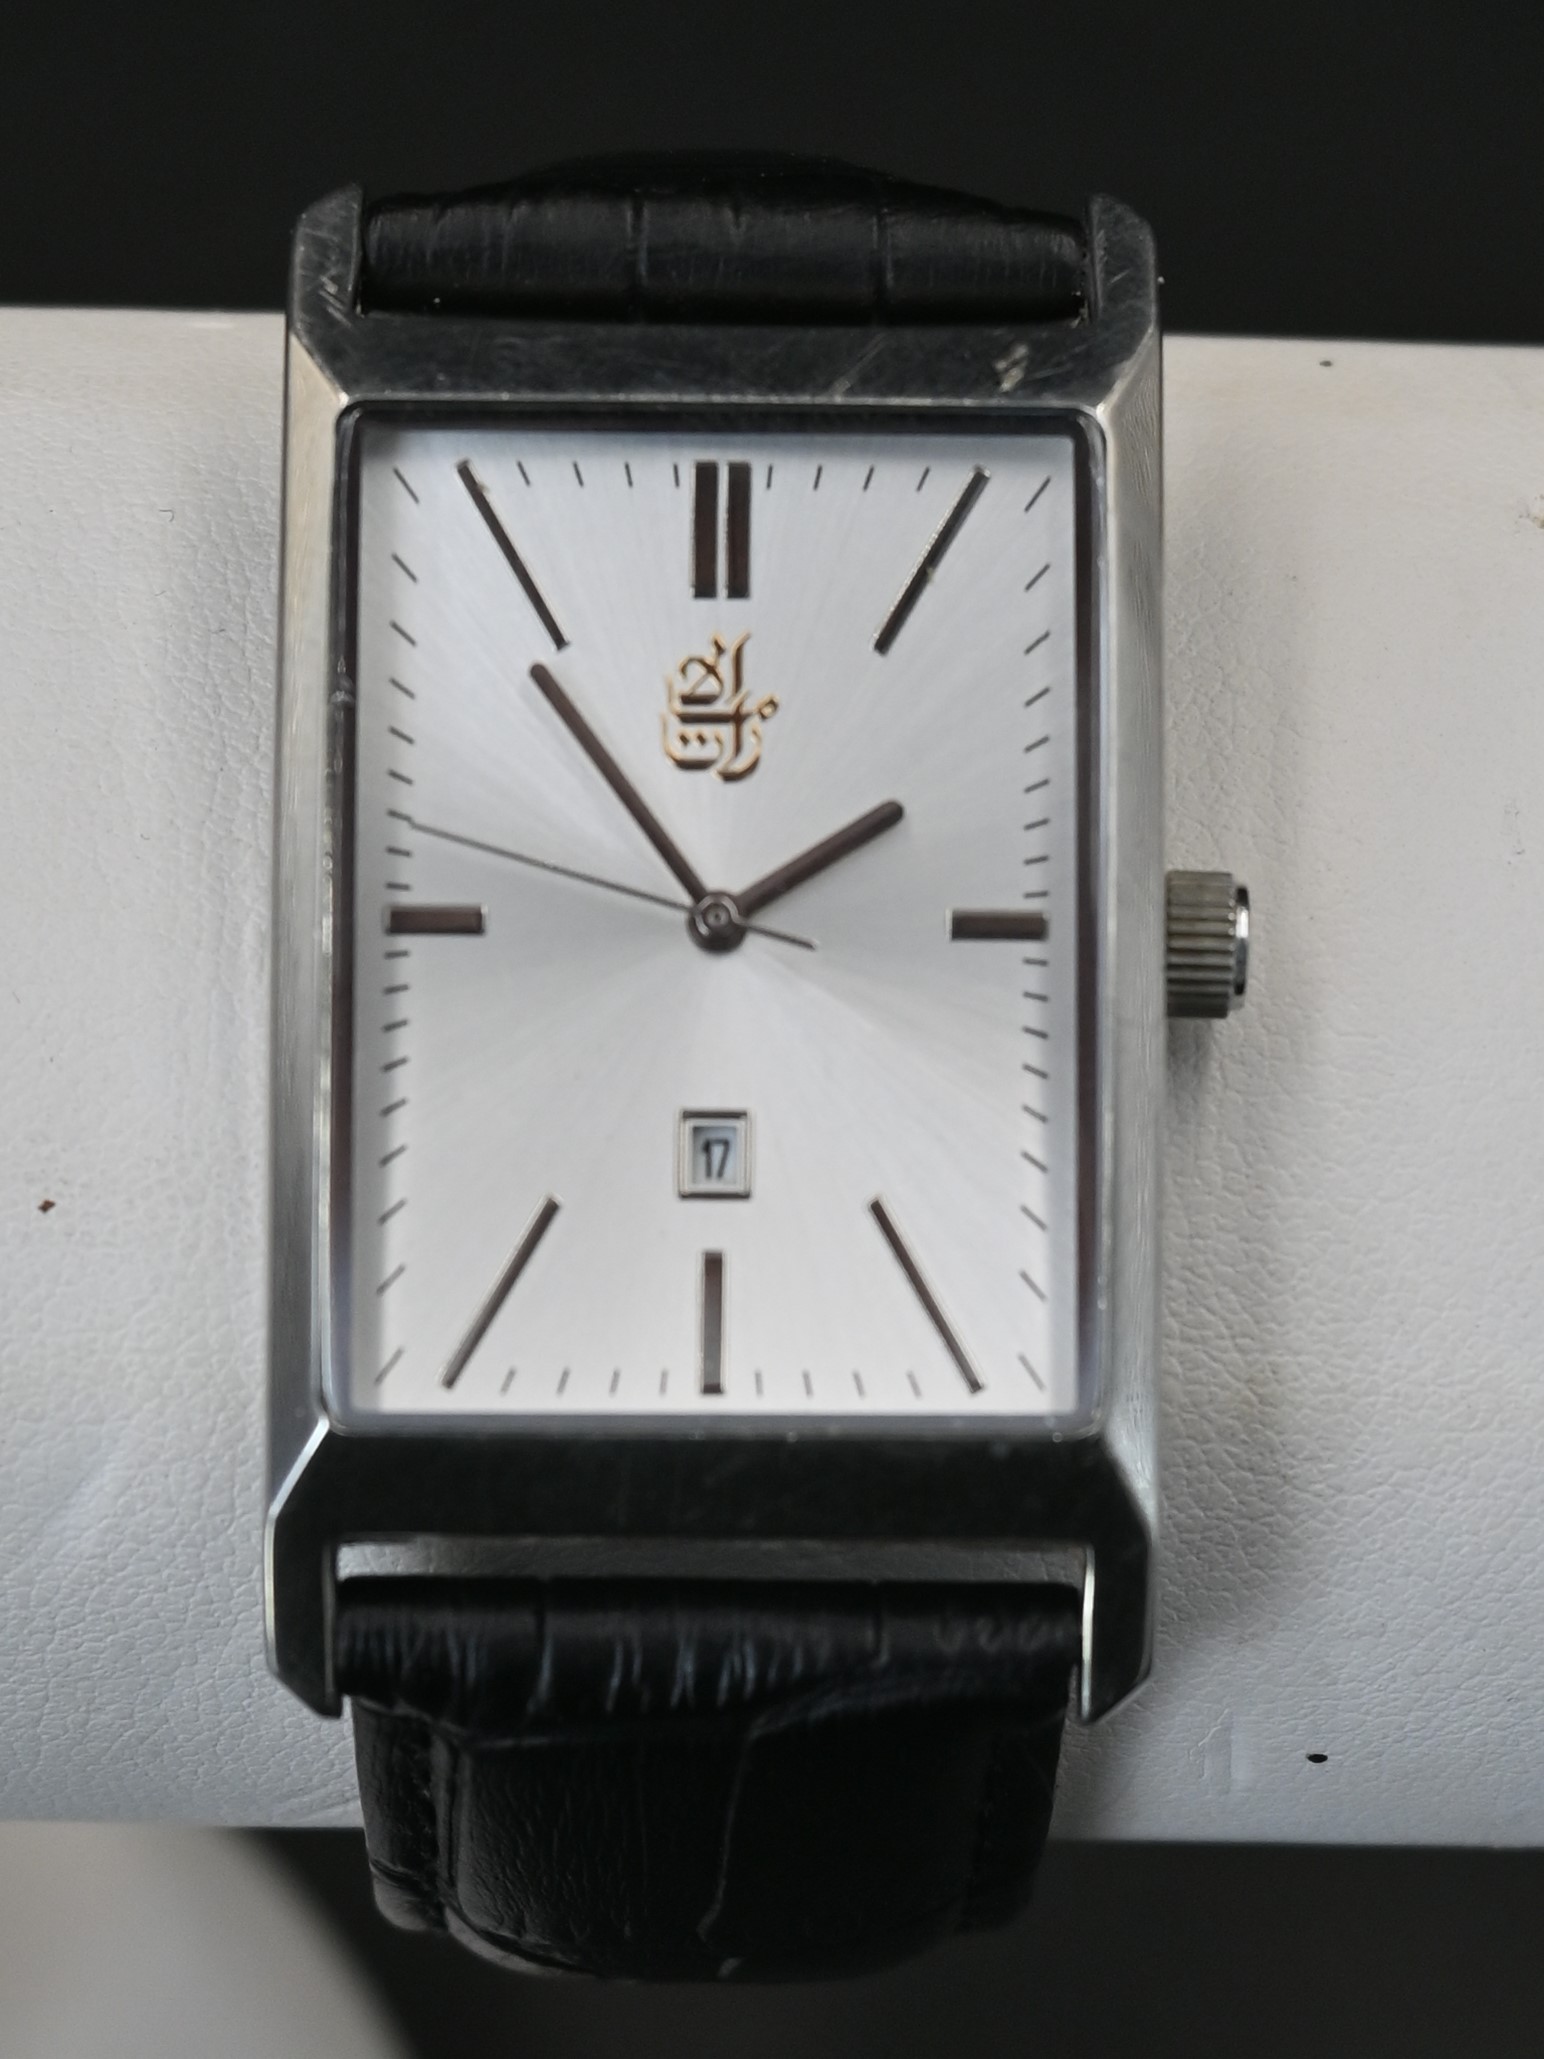 Emirates quartz wristwatch with the Emirate insignia with a silvered face and baton markers date